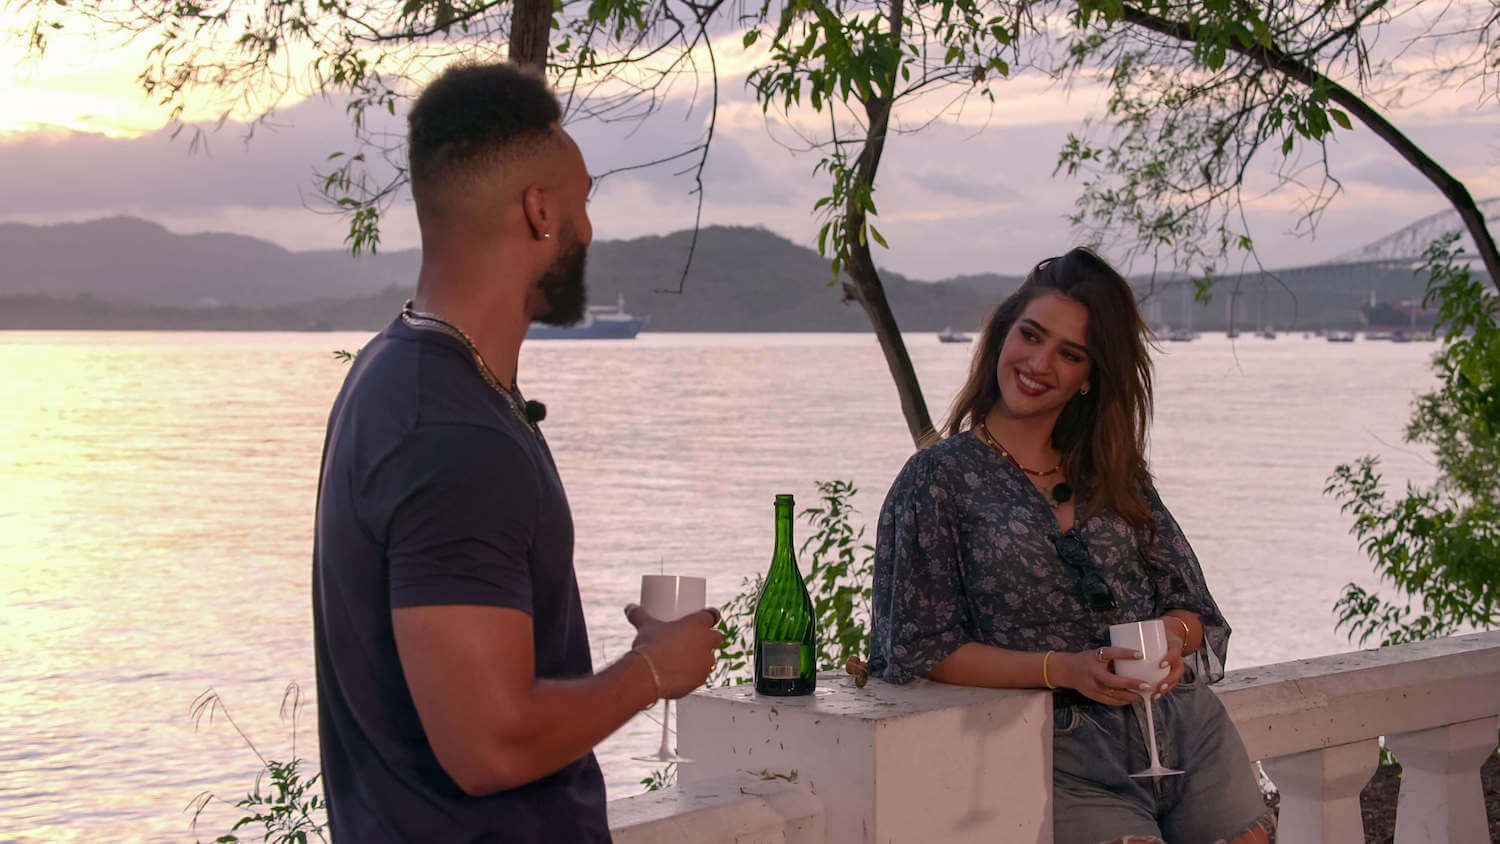 'Perfect Match' stars Ines and Bartise sip some champagne together on a date during filming.